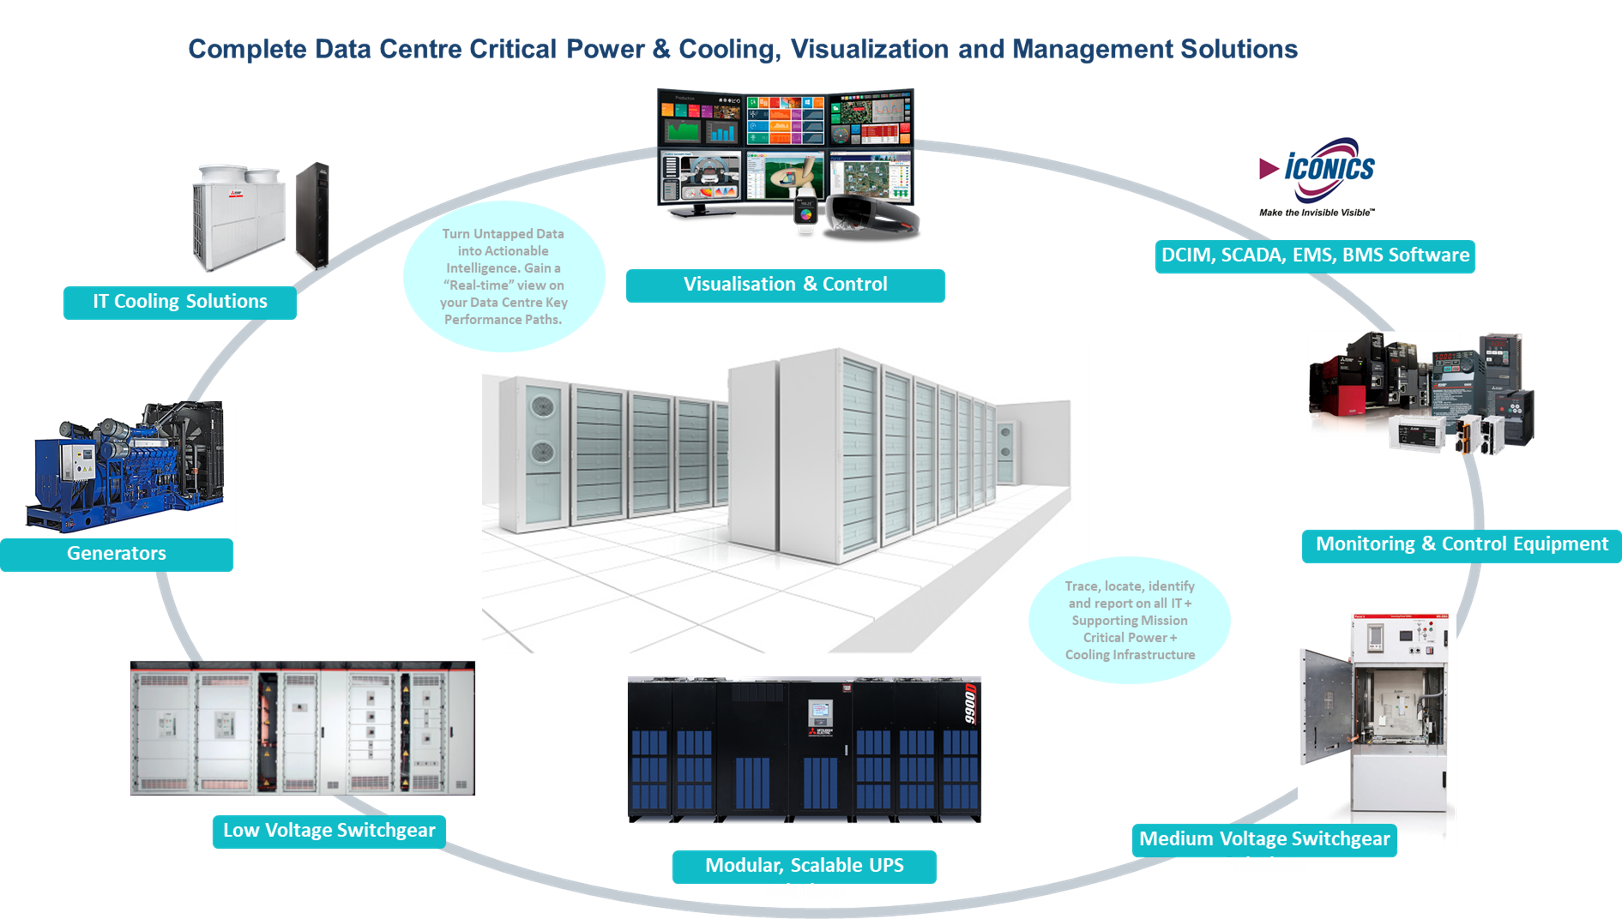 Mitsubishi Electric - Complete End to End Critical Power & Cooling for Data Centres